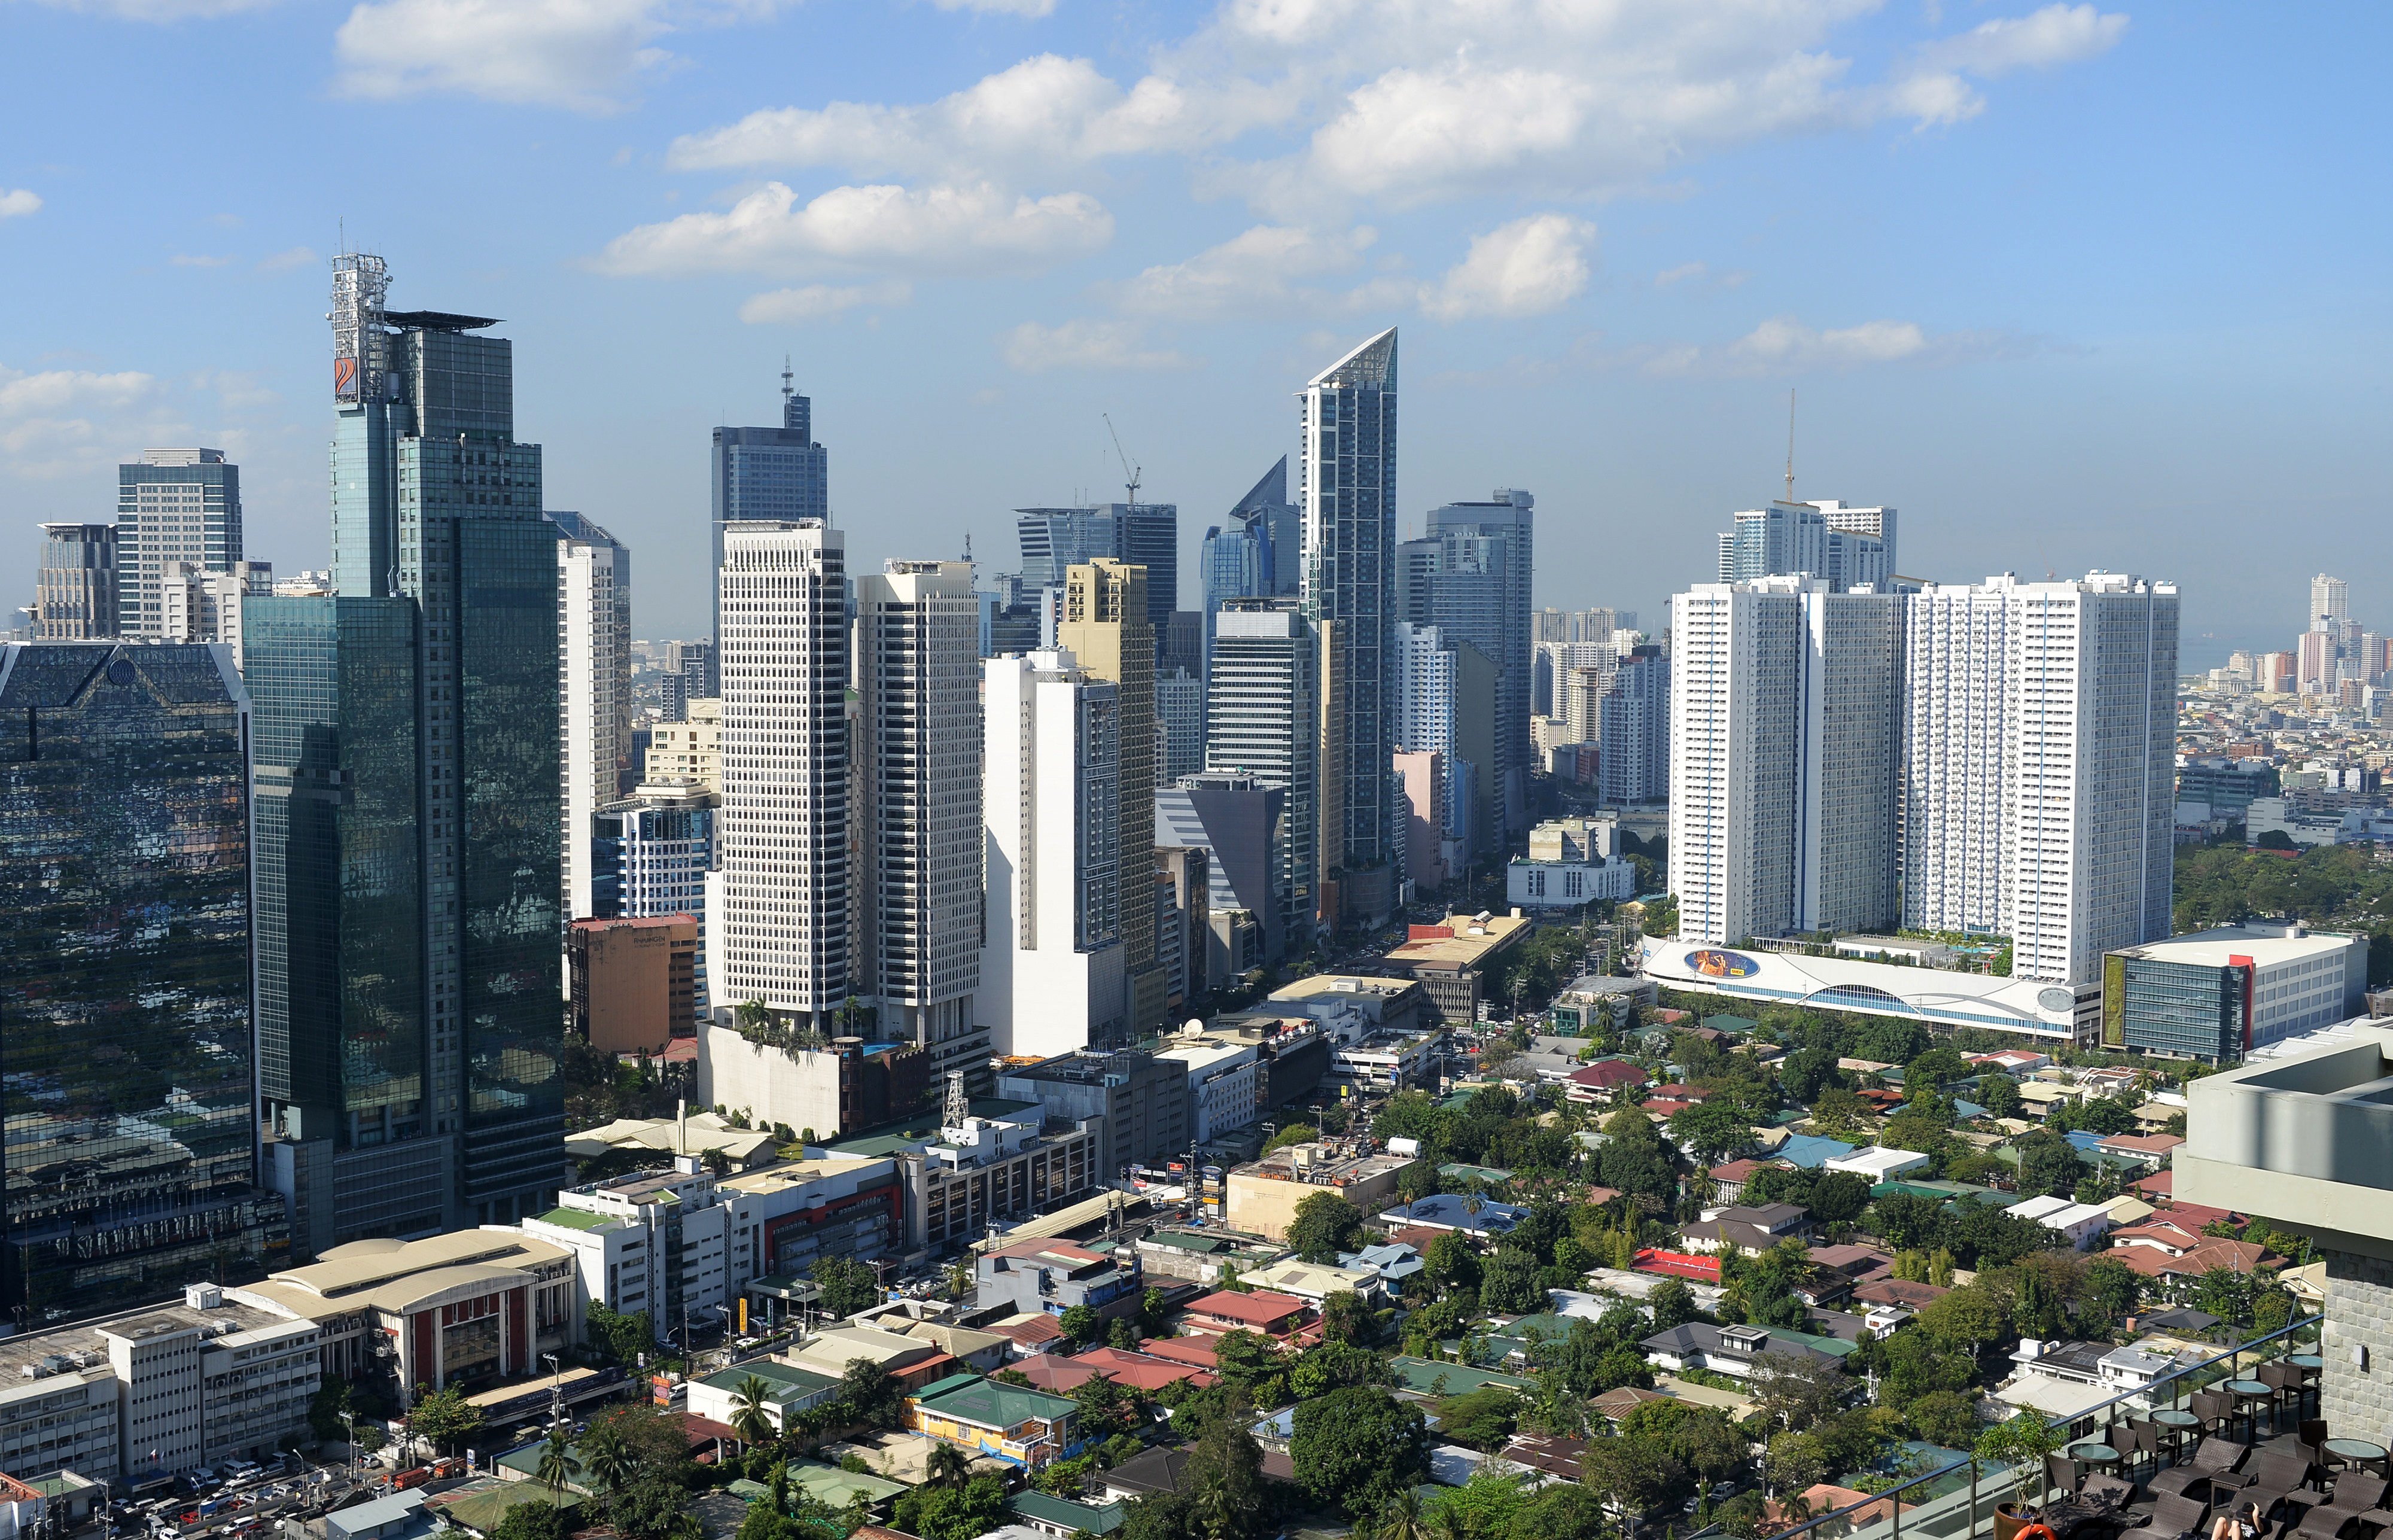 Some Philippine firms projects funded by overseas loans may lead to losses that weaken the conglomerates and affect their banking business, according to Bangko Sentral ng Pilipinas Governor Felipe Medalla. Photo: AFP